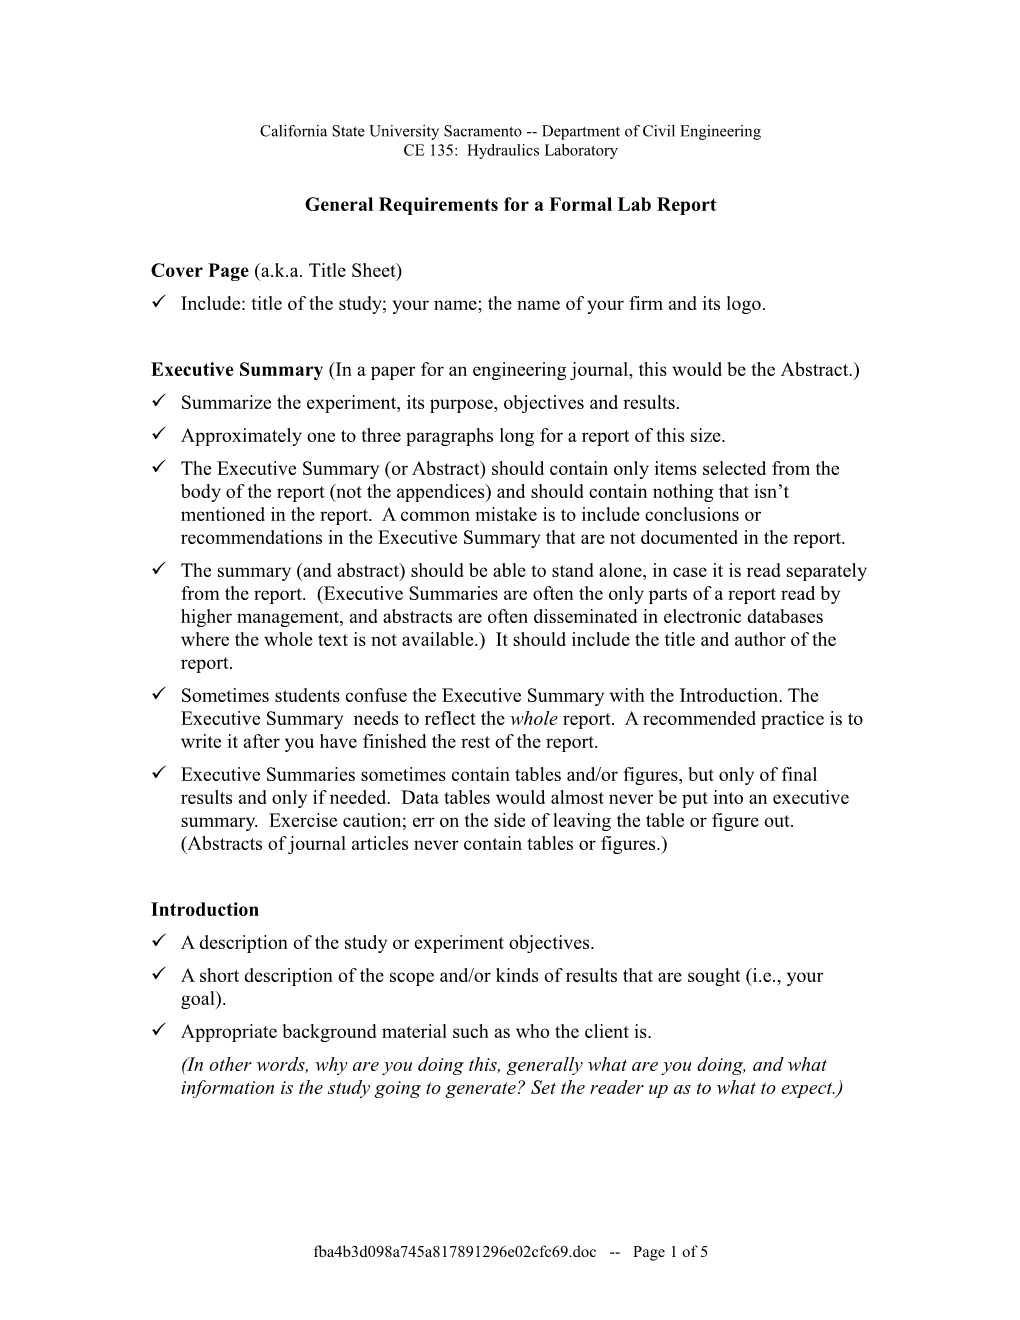 General Requirements for a Formal Lab Report